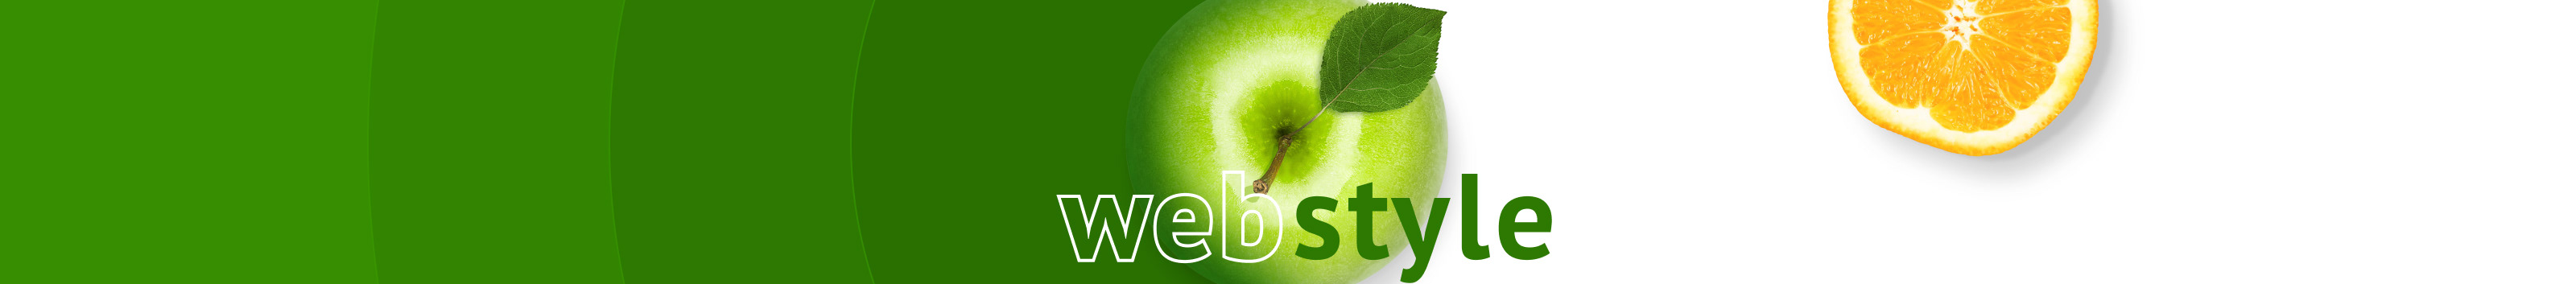 IT Webstyle's profile banner